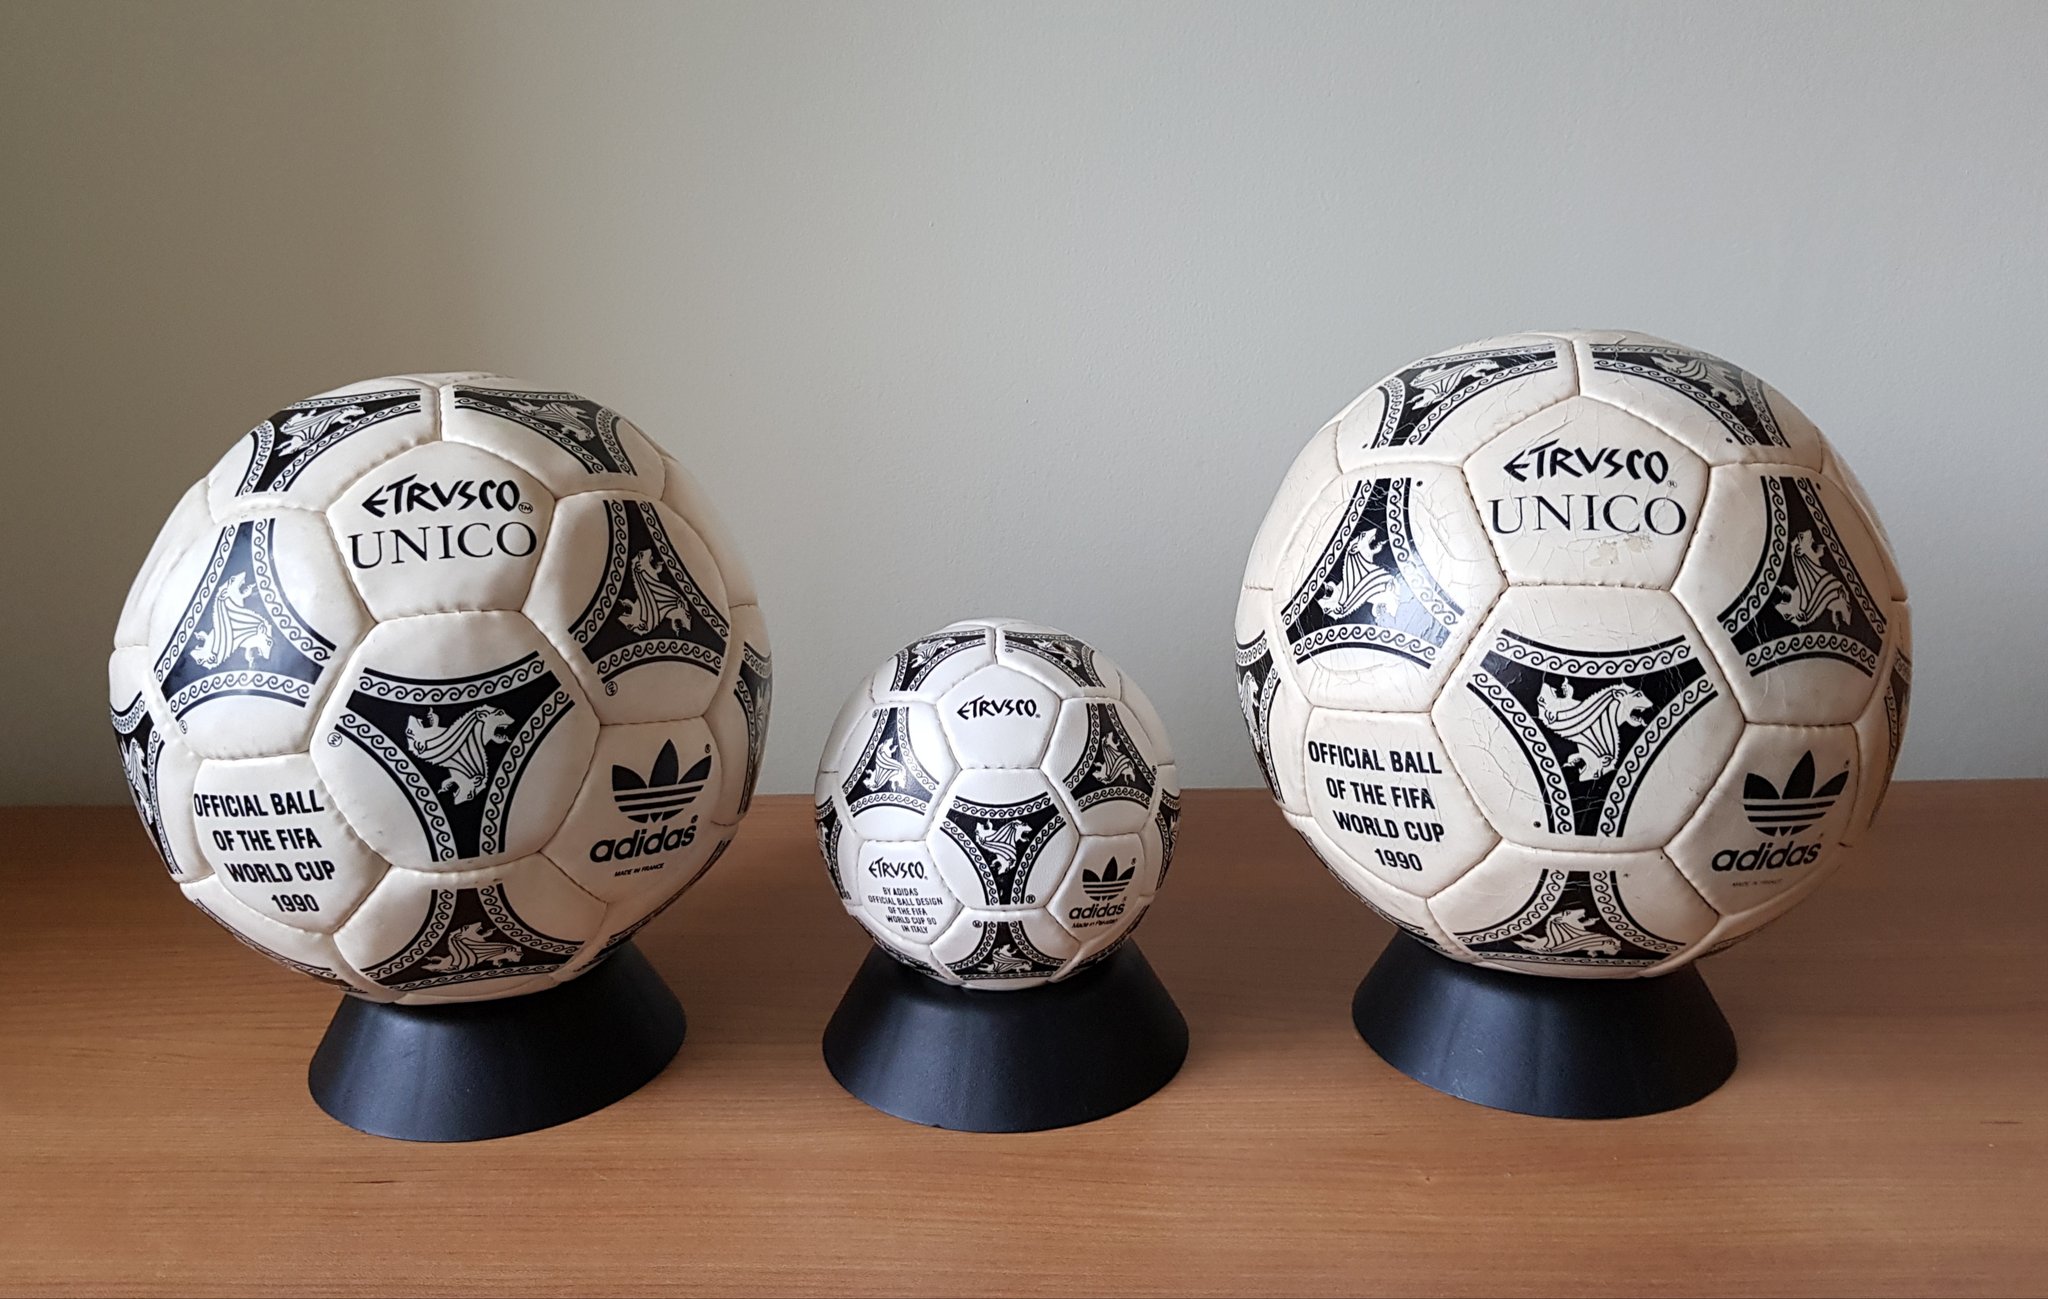 Rob Filby Twitter: "Adidas Etrusco - 1990 World Match Ball Made in France. (R) version, TM version and original mini ball #etrusco #etruscounico #adidasetrusco #wmball #worldcupball #1990worldcup #italy90 #